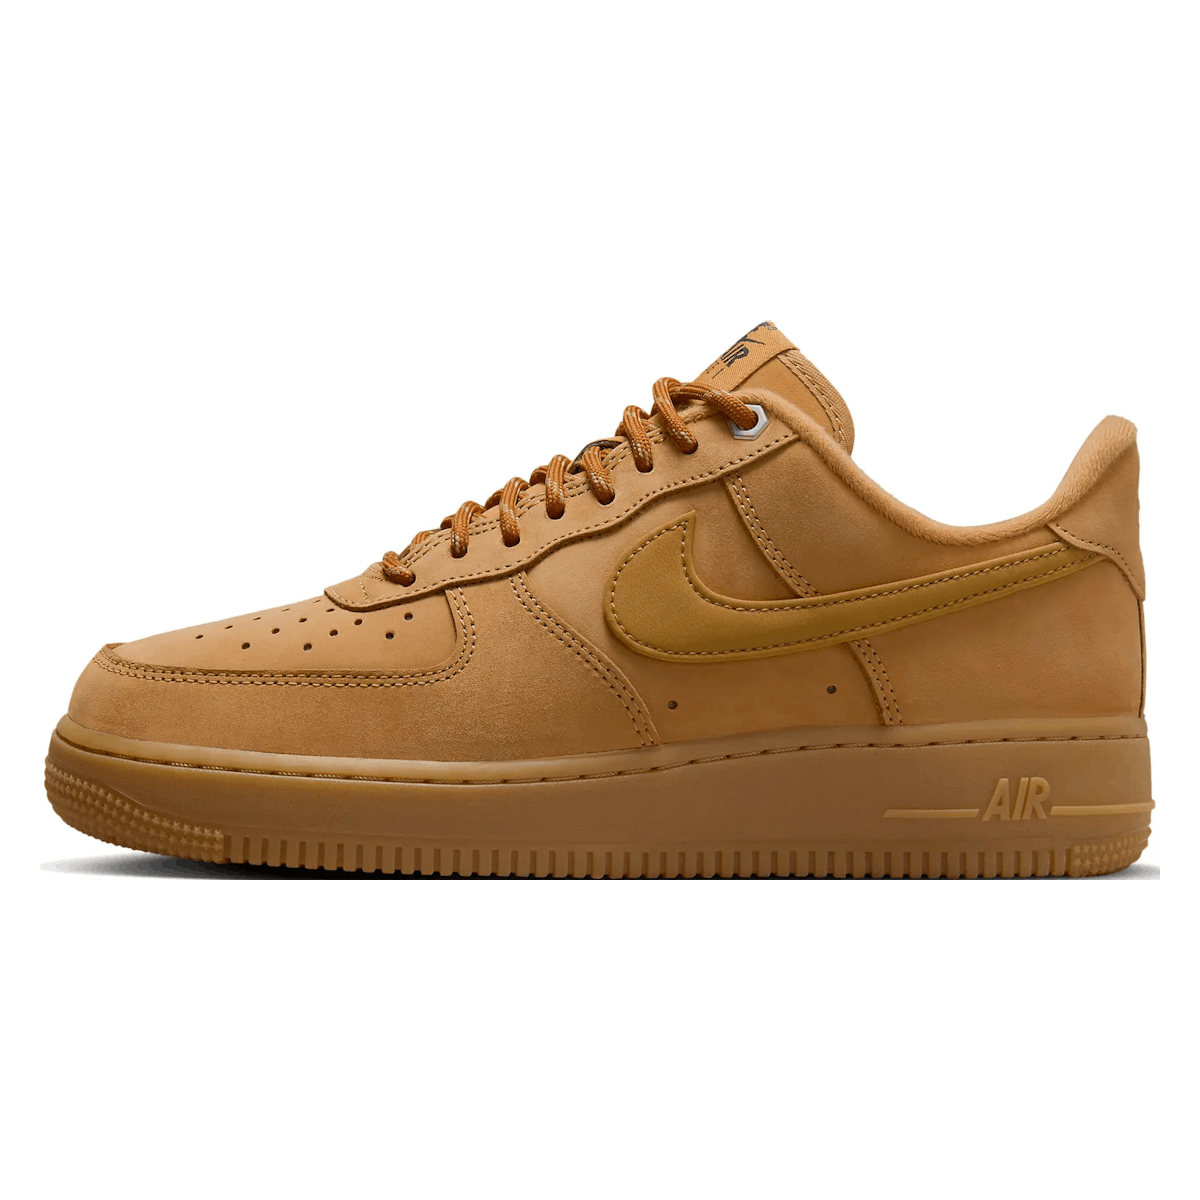 Nike Air Force 1 Low "Flax"